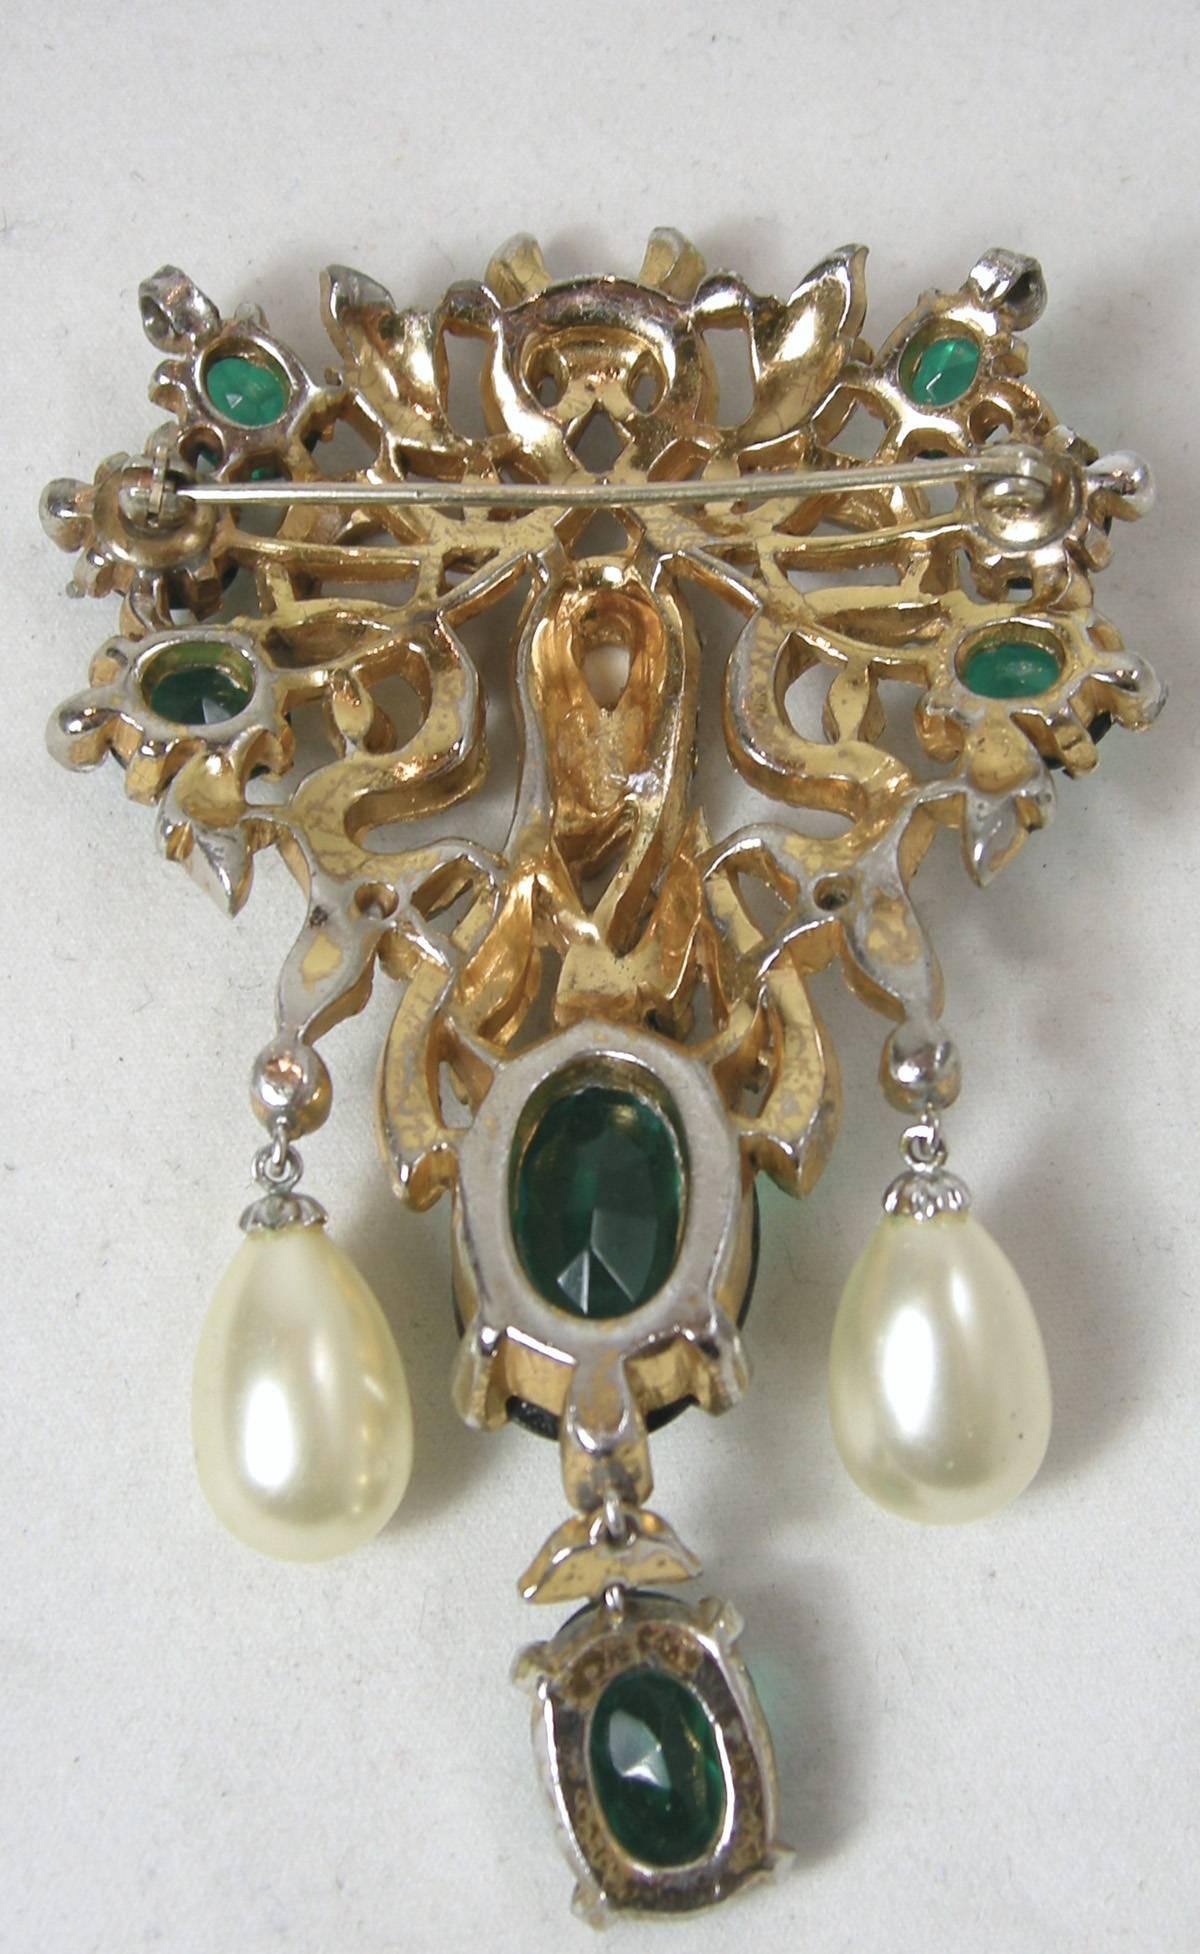 Although this magnificent brooch is not signed, it is without a doubt an important piece from Trifari’s famous Empress Eugenie collection.  The brooch has a gold vermeil with emerald green crystals with pave crystals and black enameling intertwining